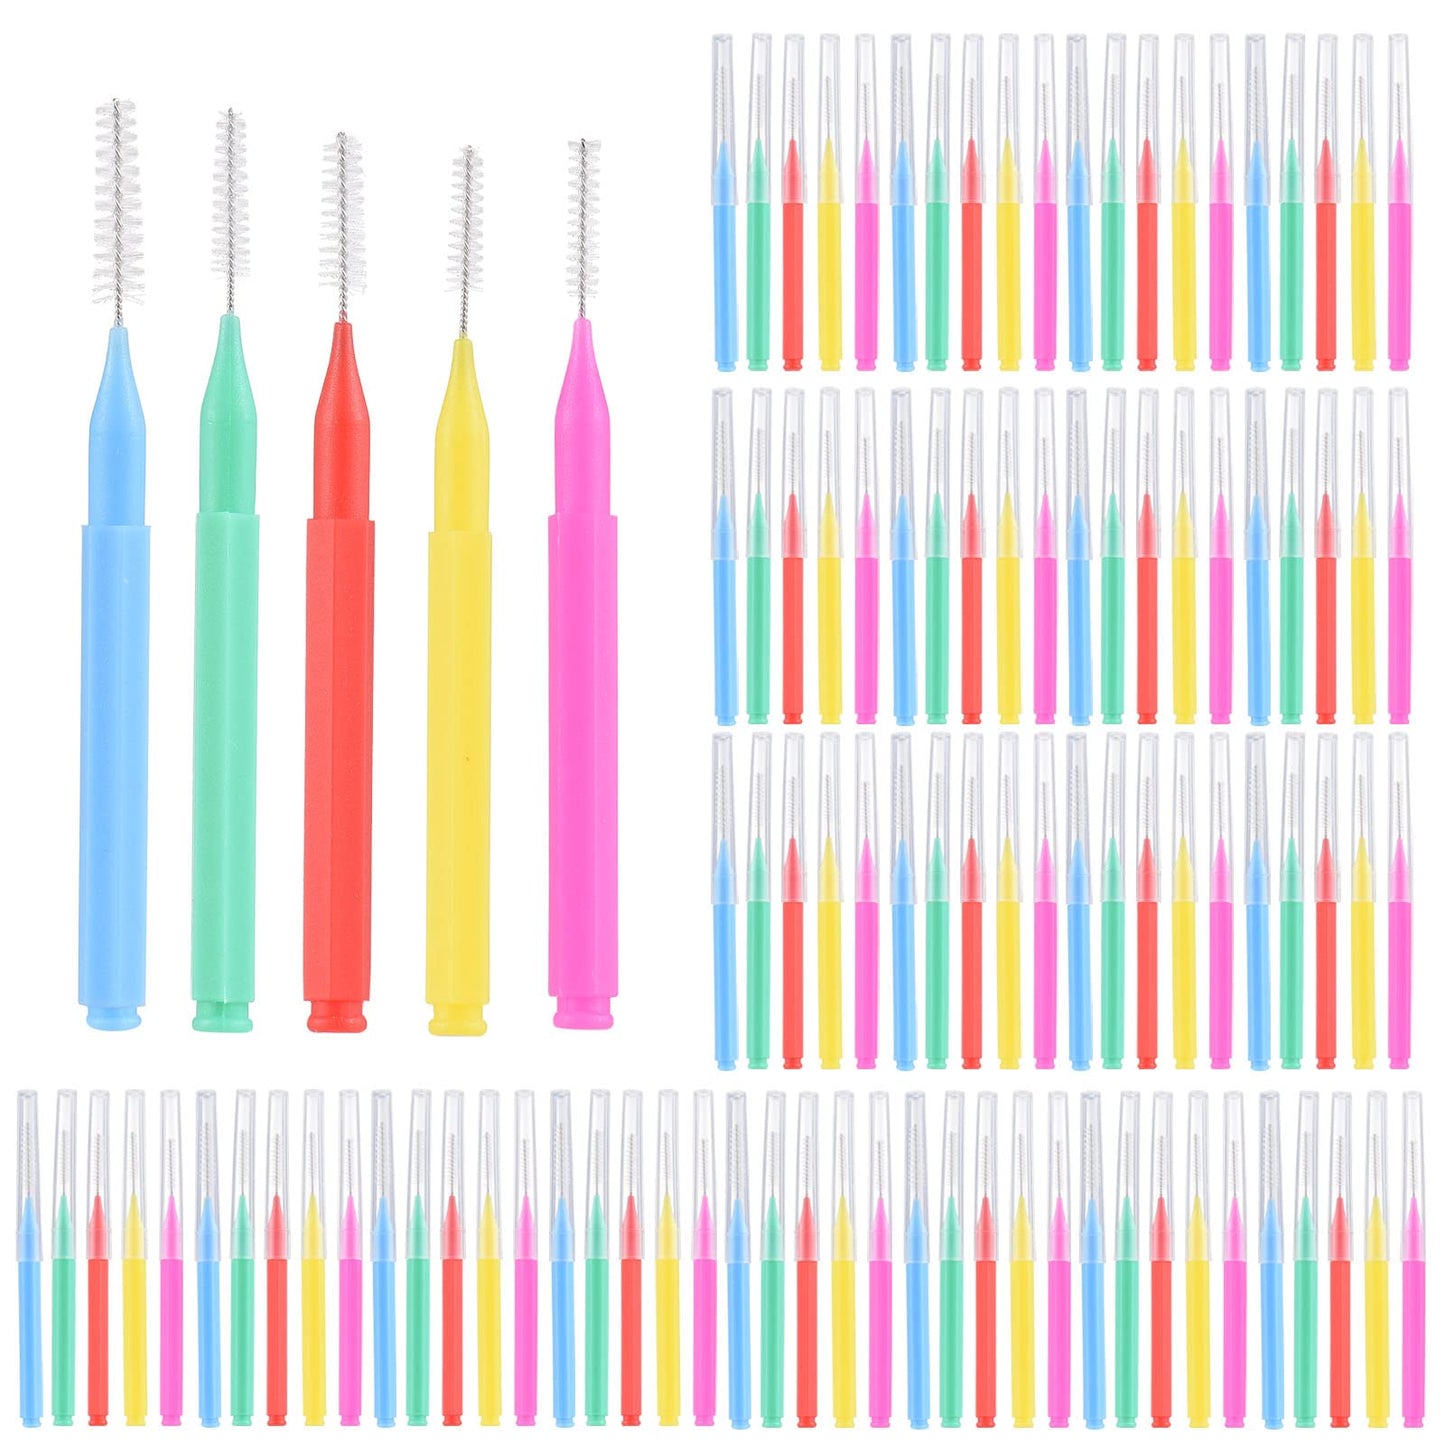 Eacam 100 Pieces Interdental Brushes Floss Toothpick Braces Brush Tooth Cleaning Tool Tooth Care Interdental Brushes Set